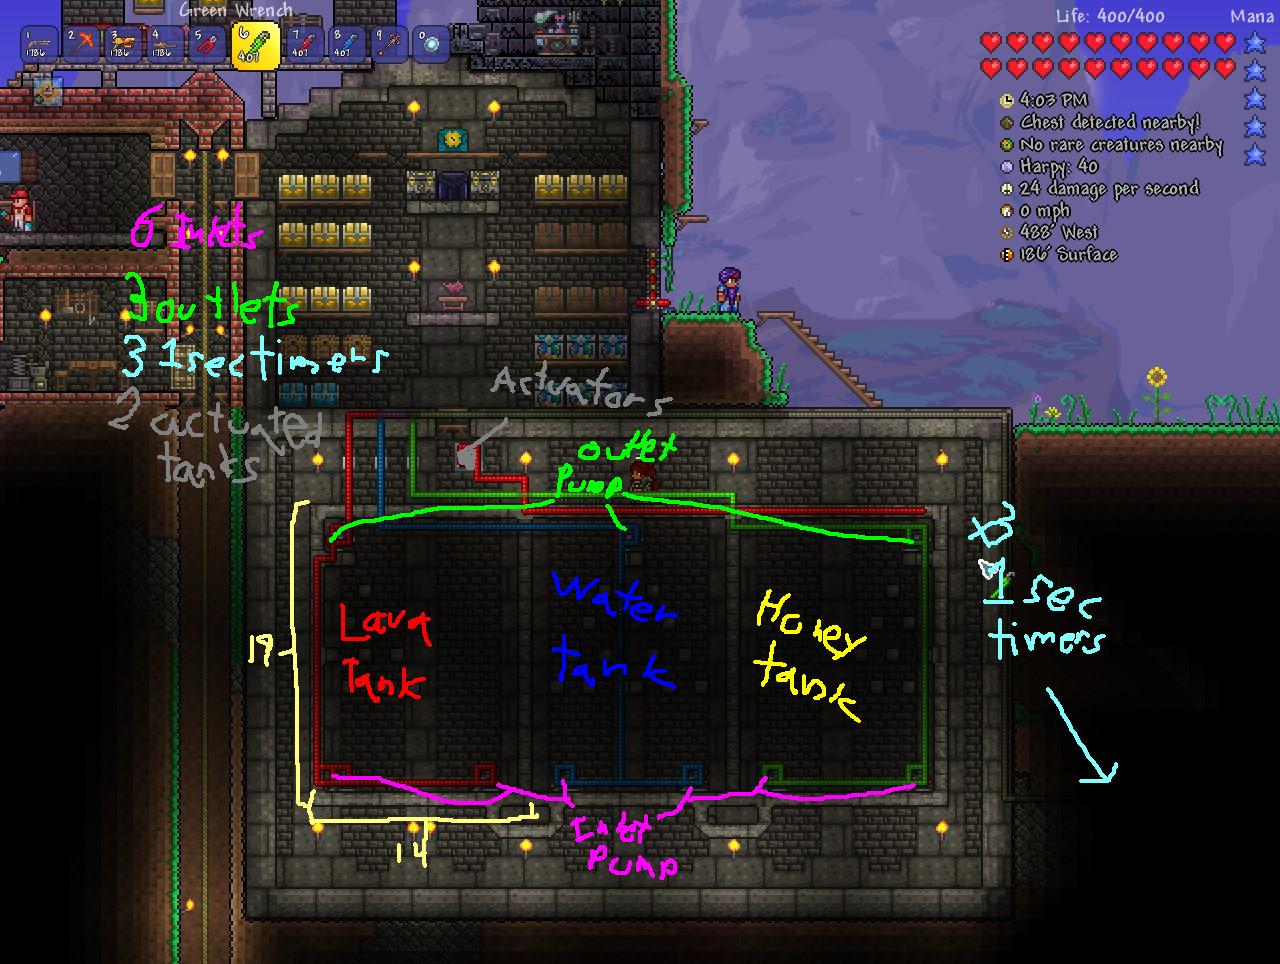 Communaute Steam Guide Lord S Guide To Terraria Survival The Pre Hardmode Grind And A Wall Of Meat